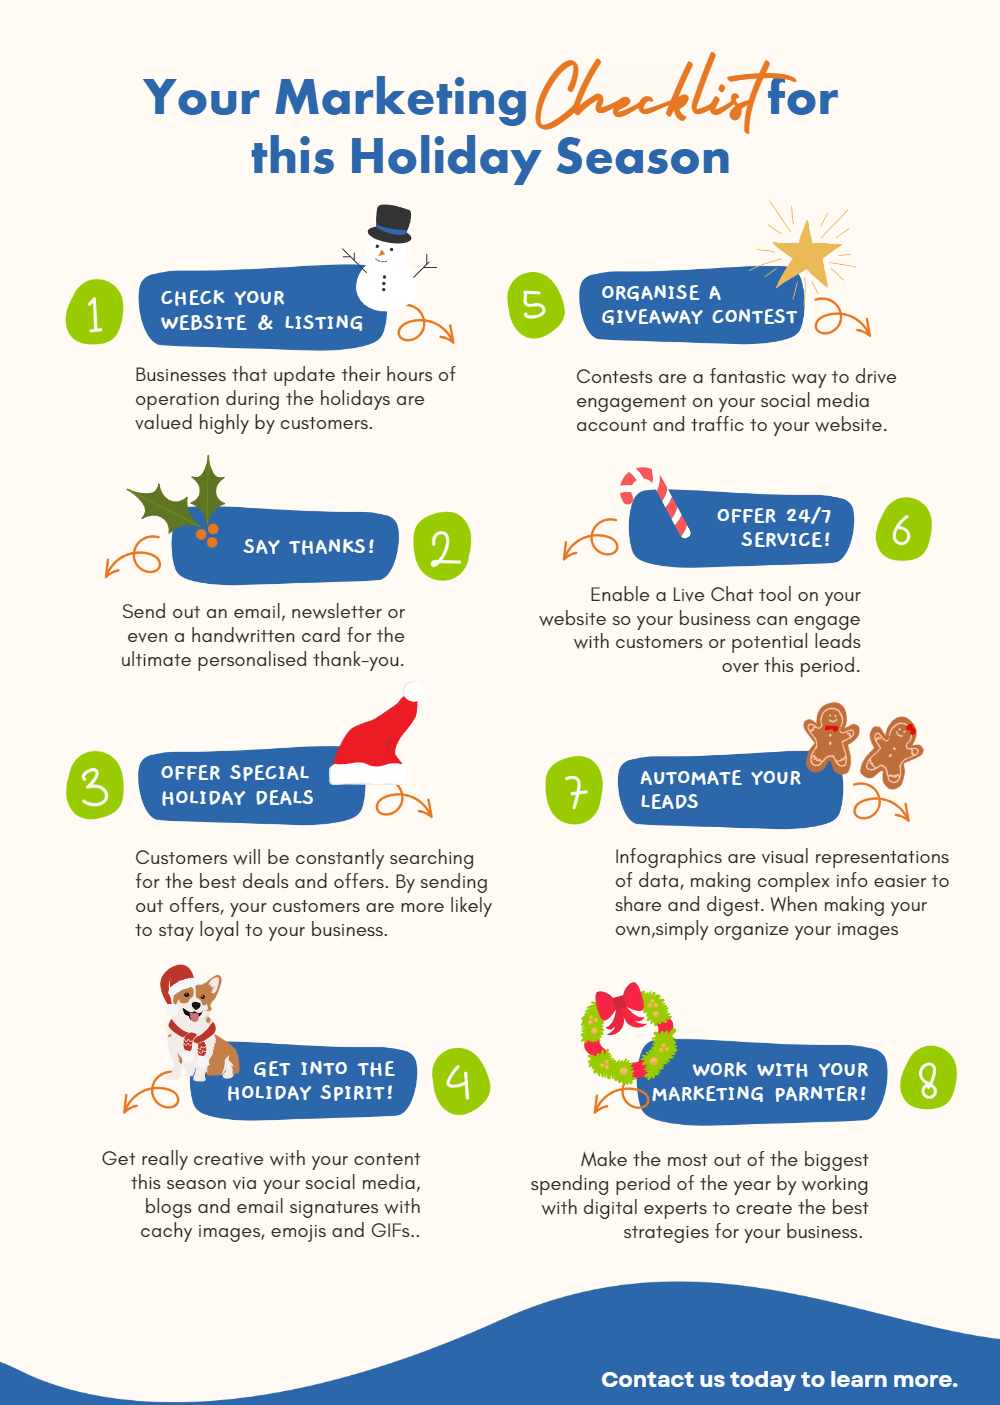 Your Marketing Checklist for this Holiday Season